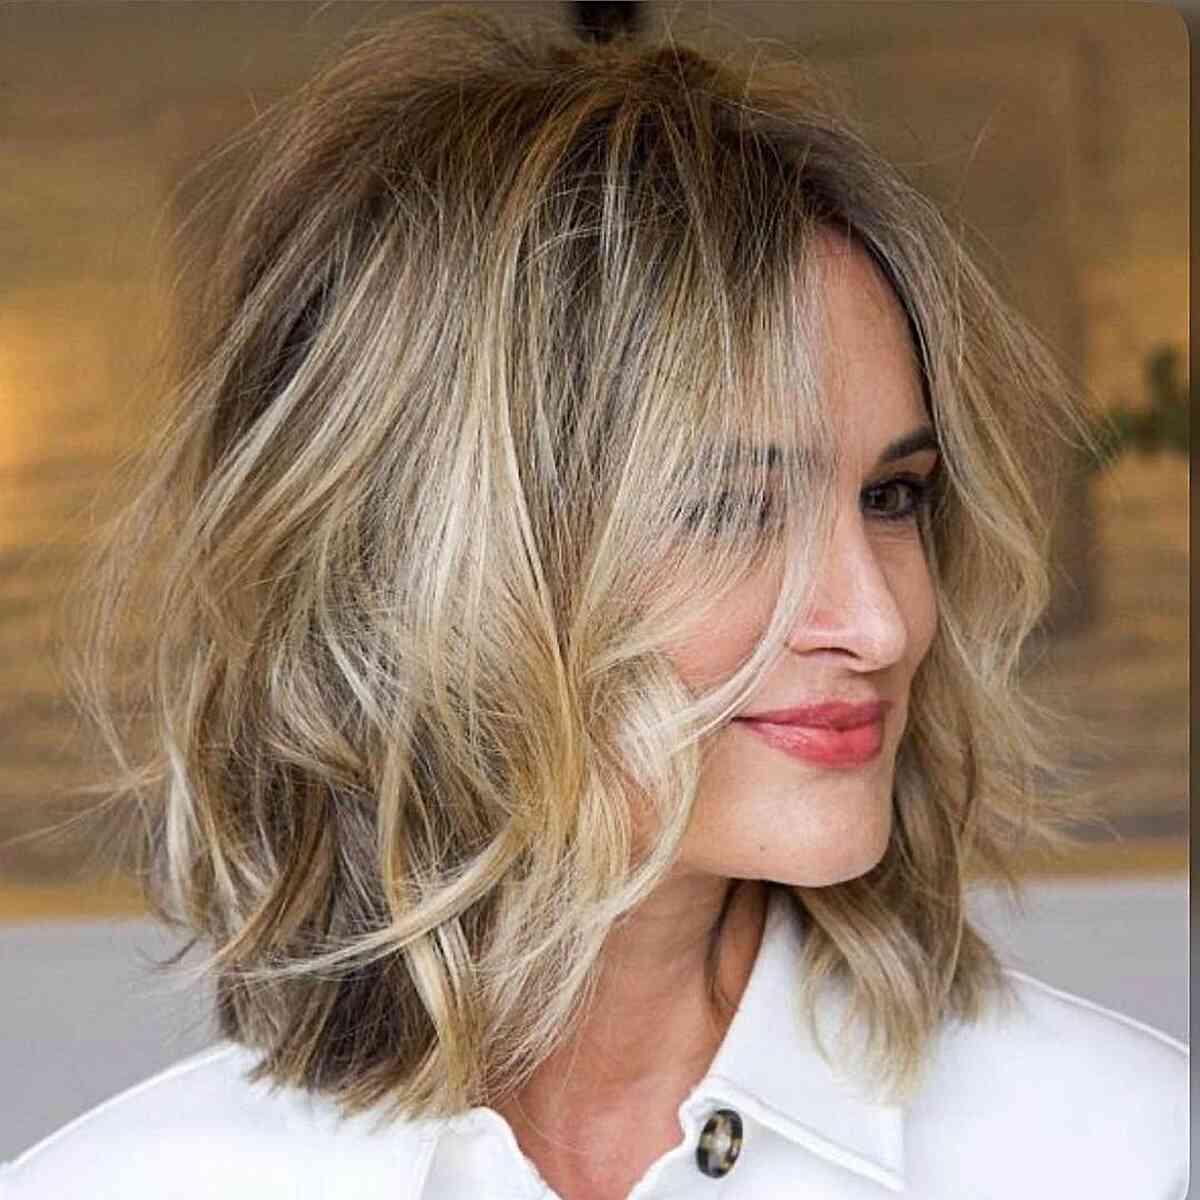 22 Hairstyles for Dirty Hair (Because Washing Isn't Always an Option)